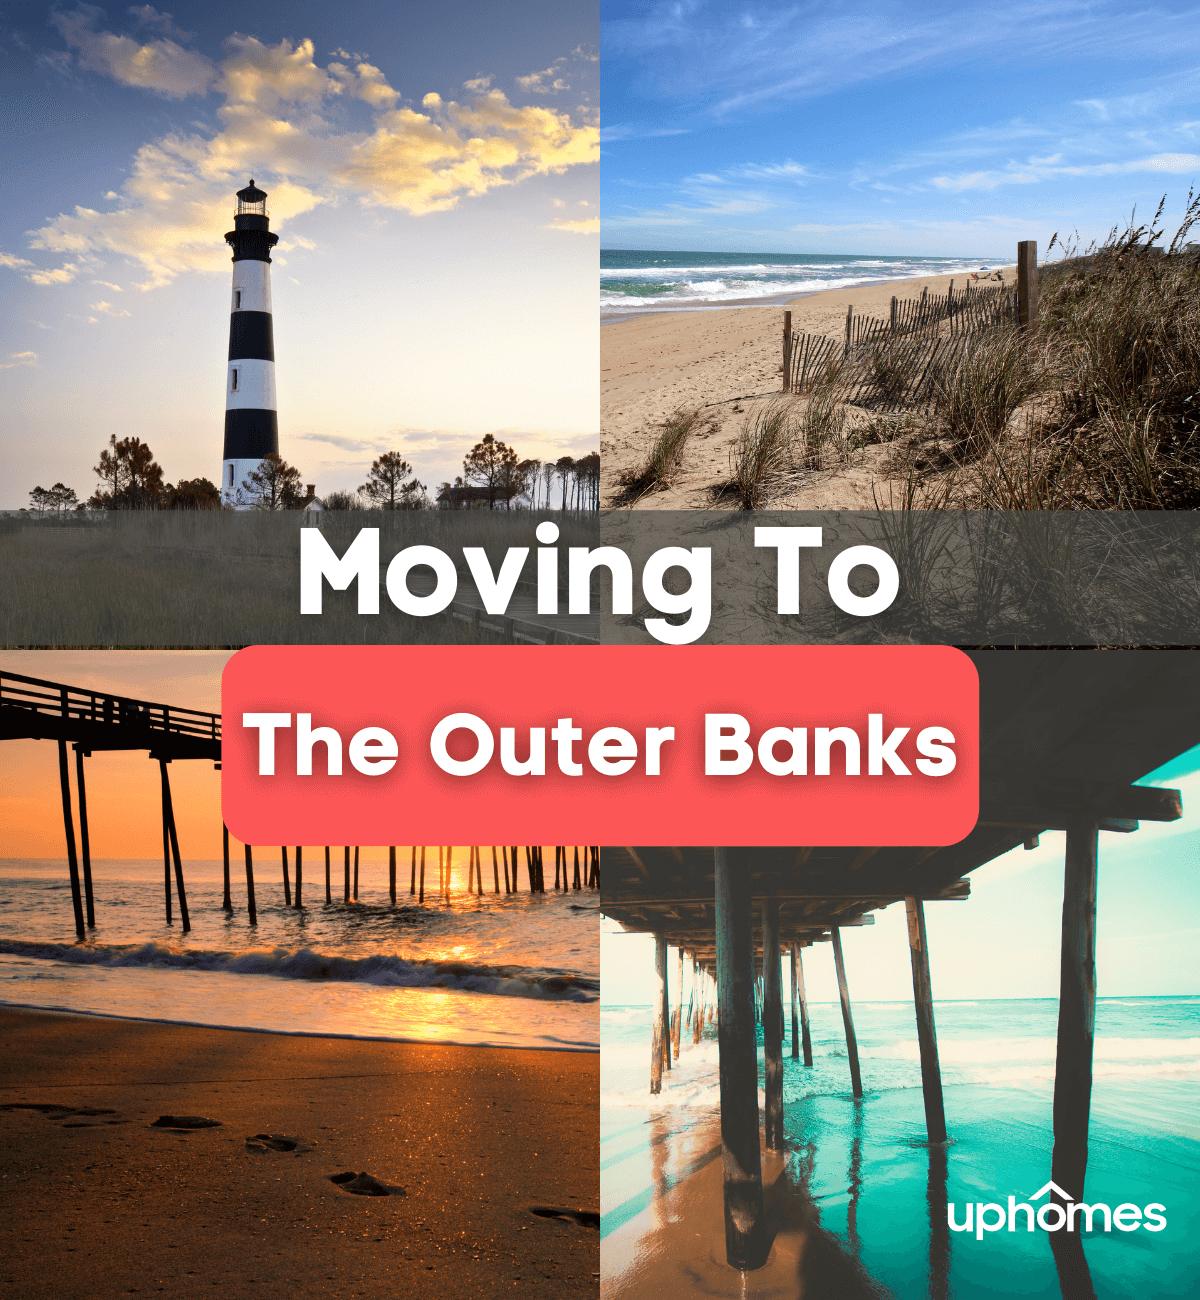 Moving to The Outer Banks North Carolina - What is it like living in the Outer Banks (OBX)